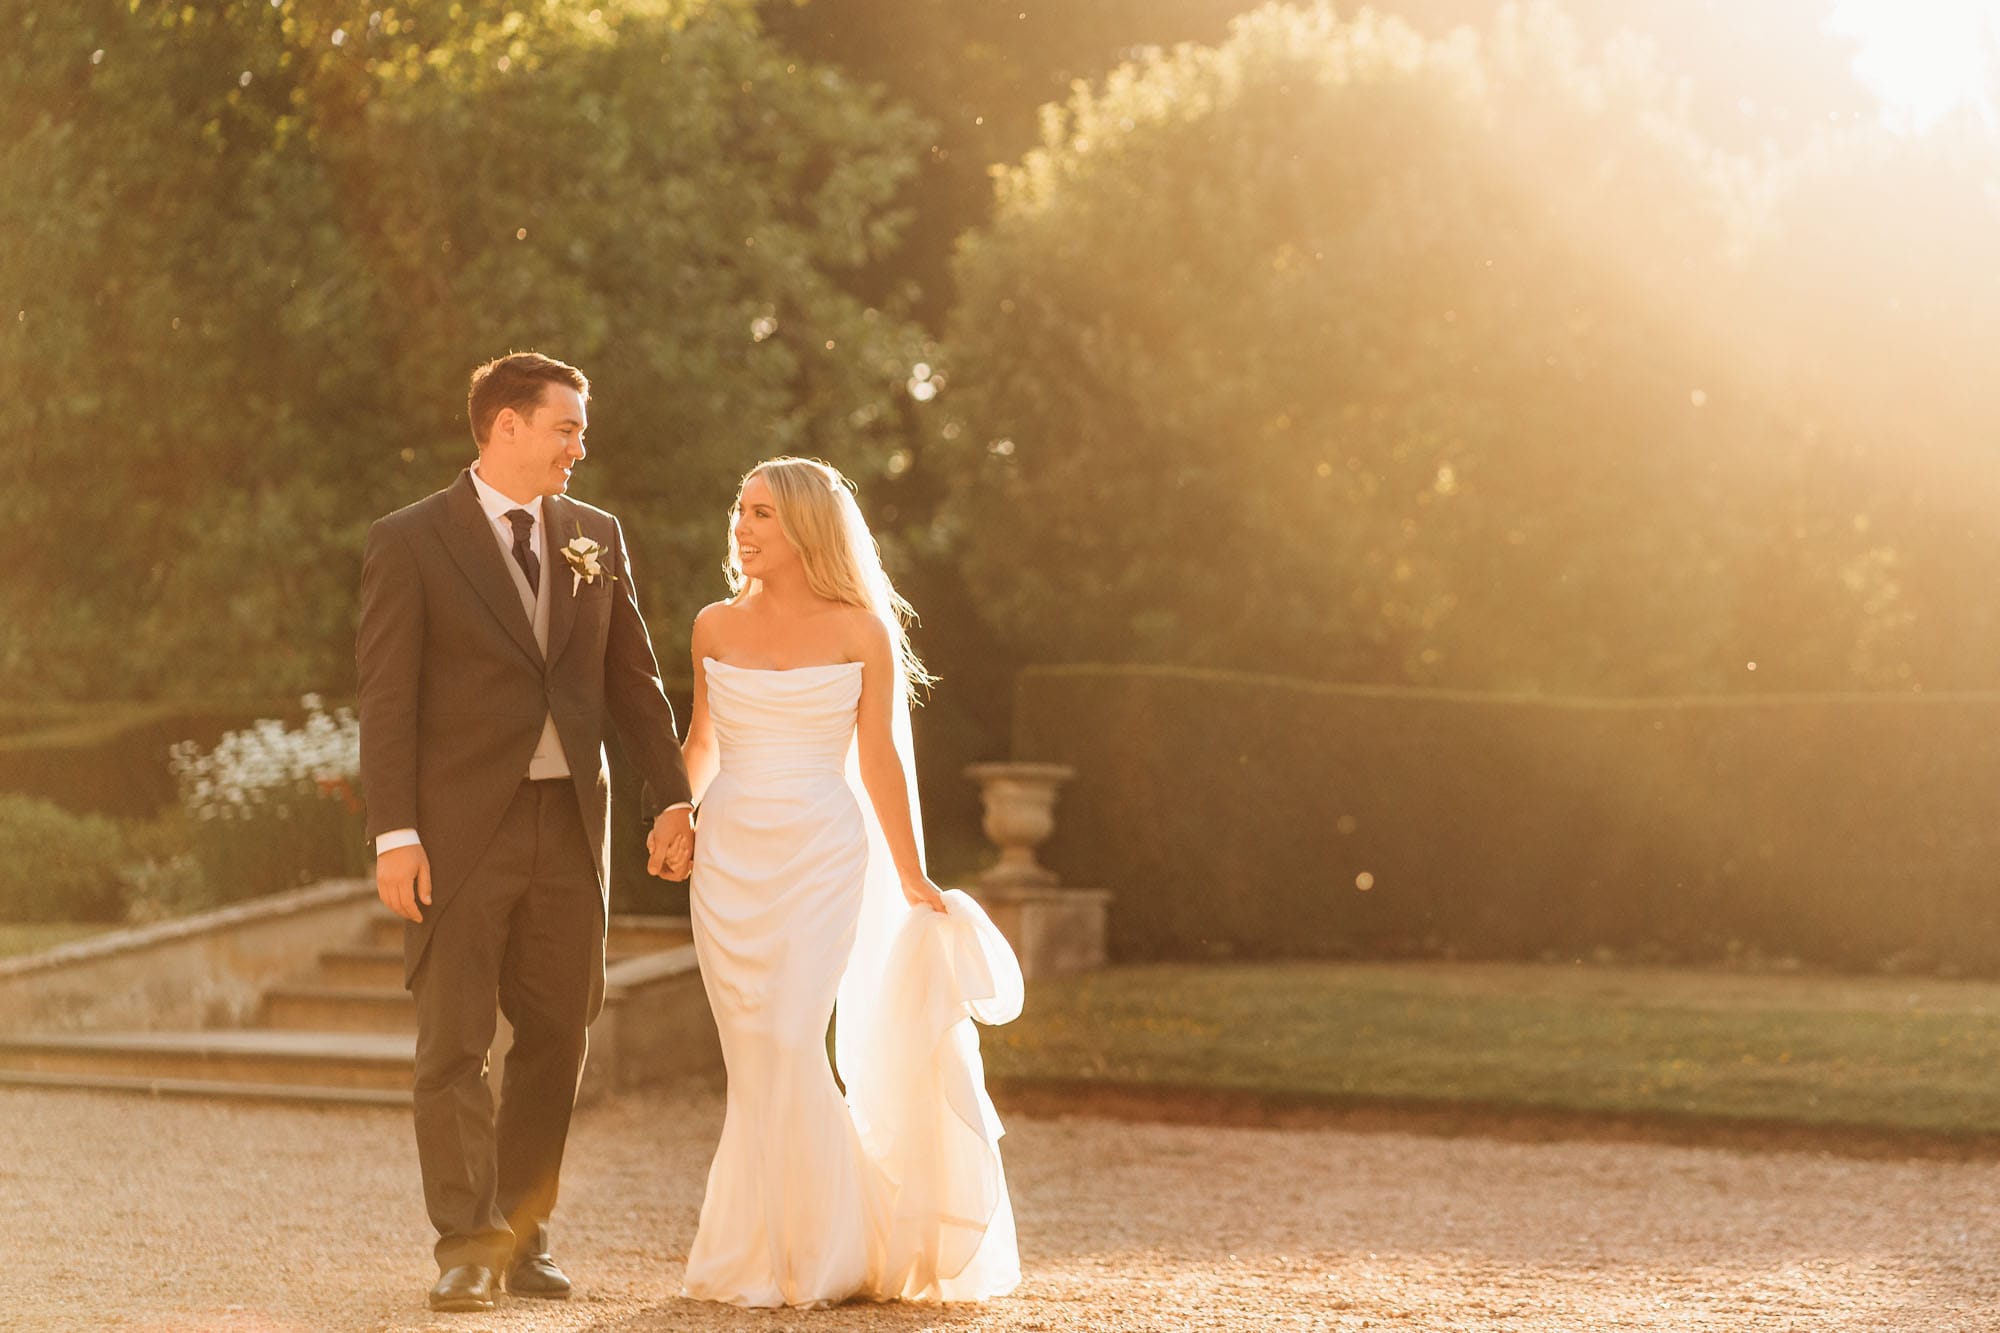 Bride and groom walking during golden hour at Norwood Park
